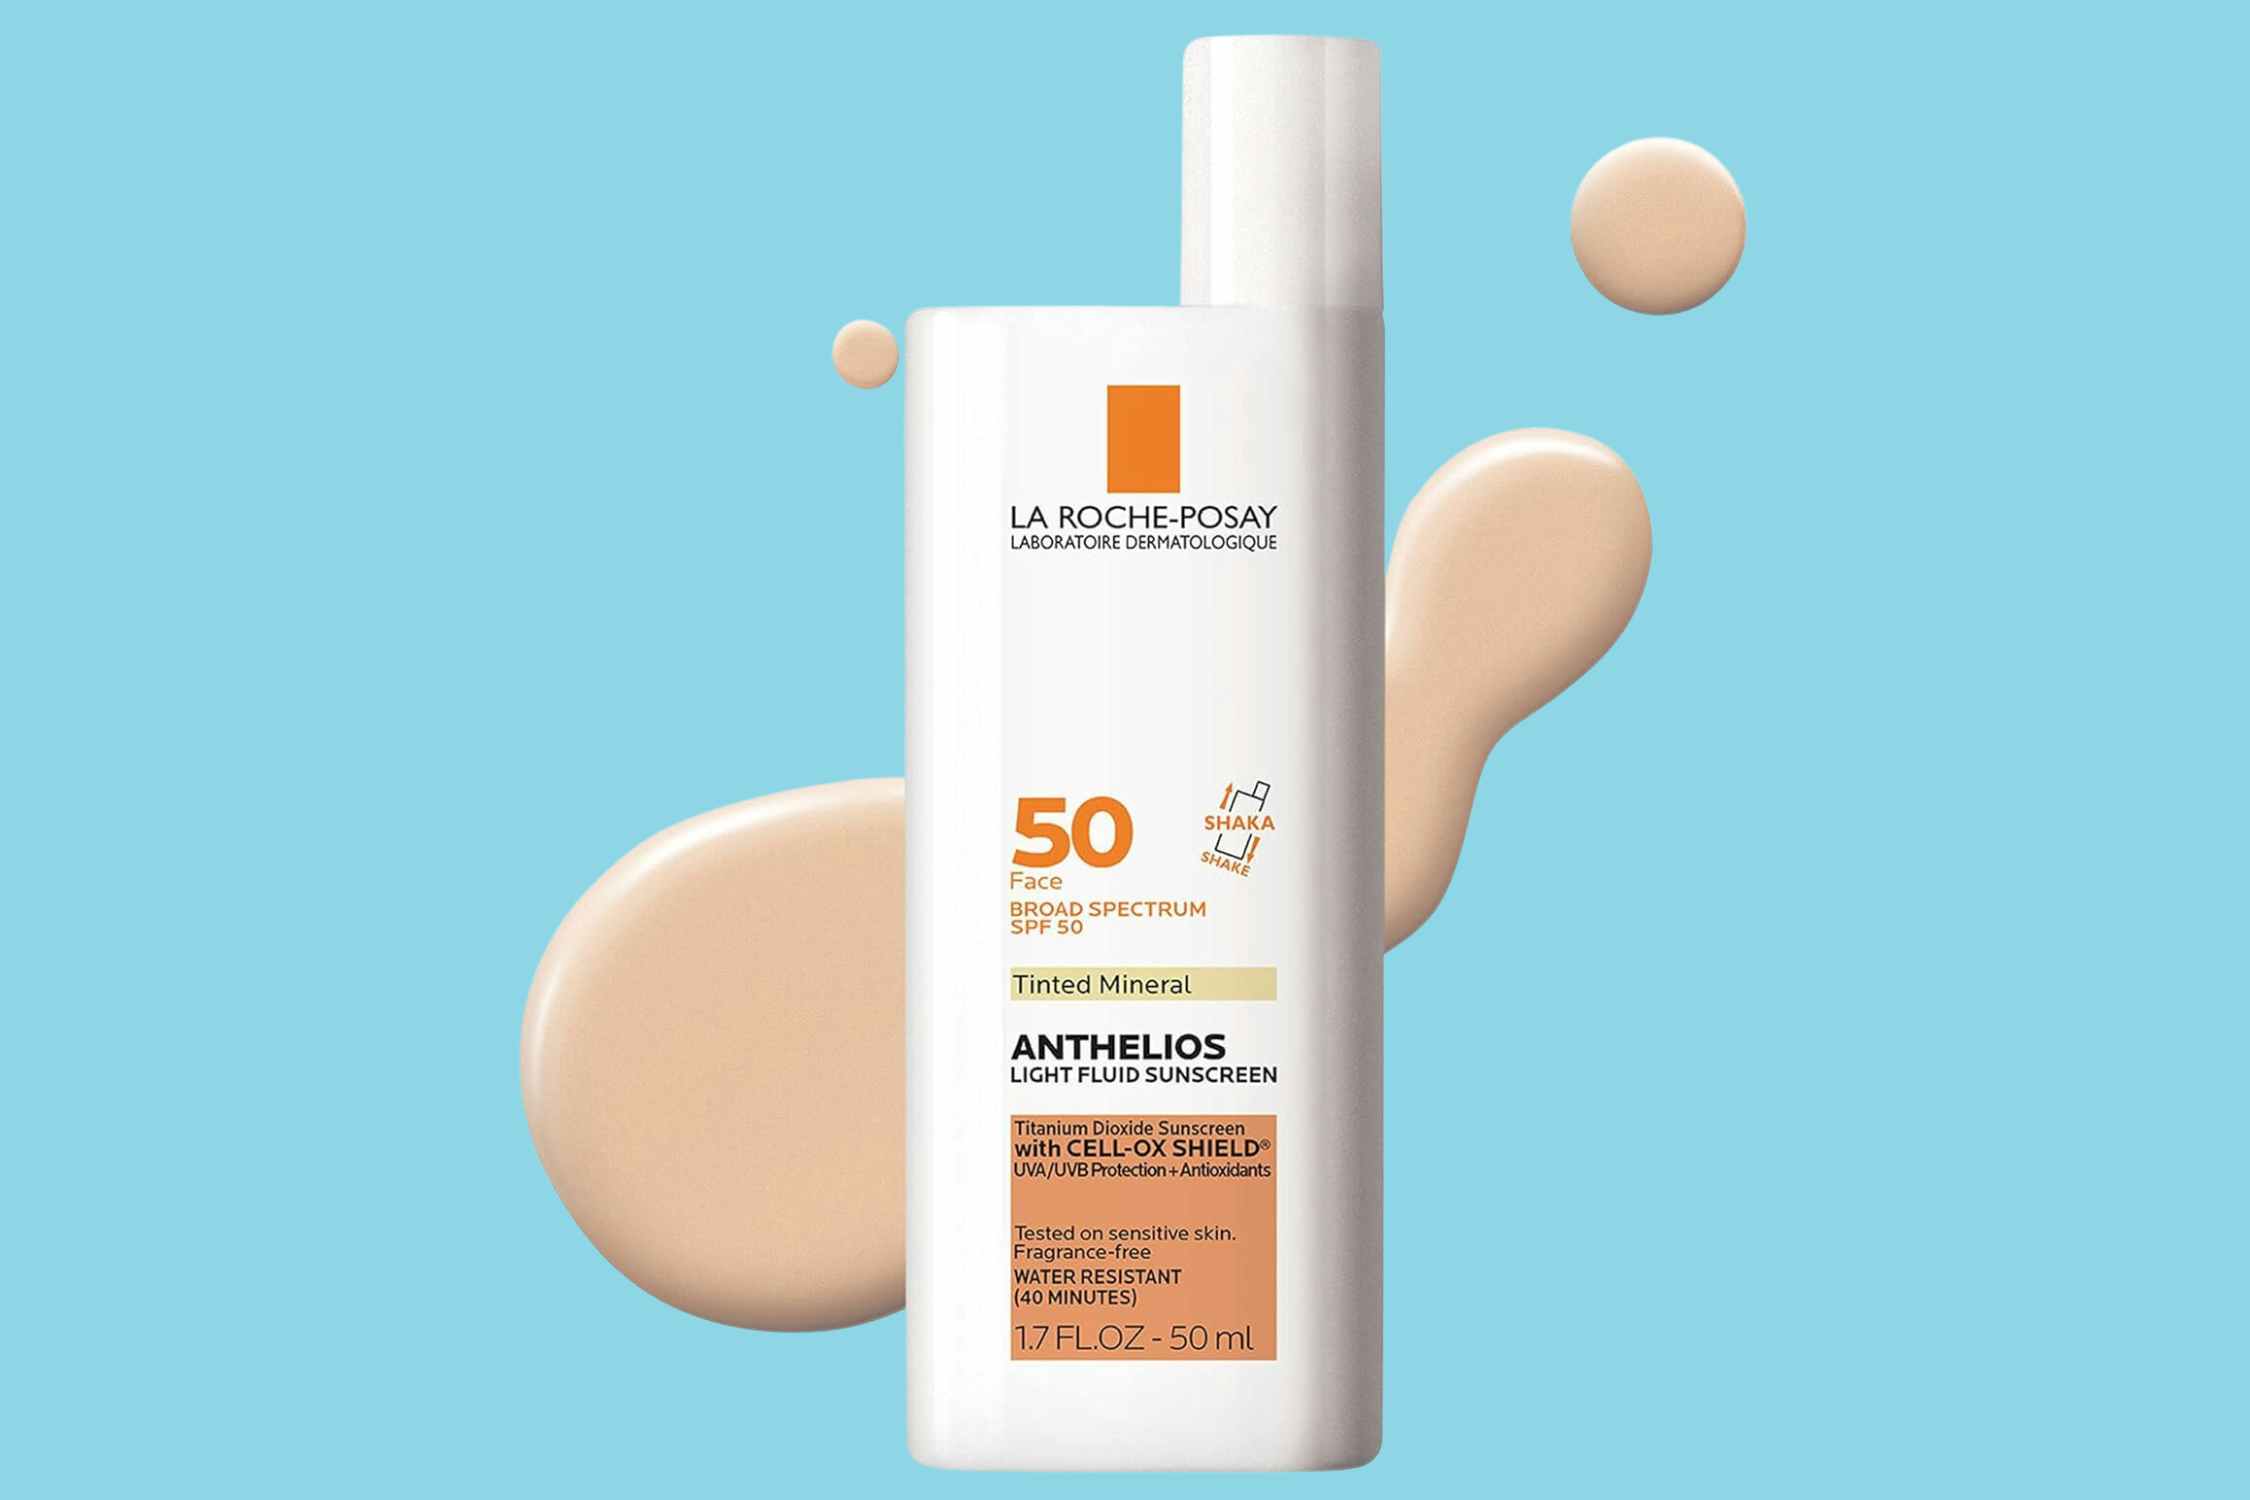 La Roche-Posay Anthelios Tinted Sunscreen, Now $28.49 on Amazon